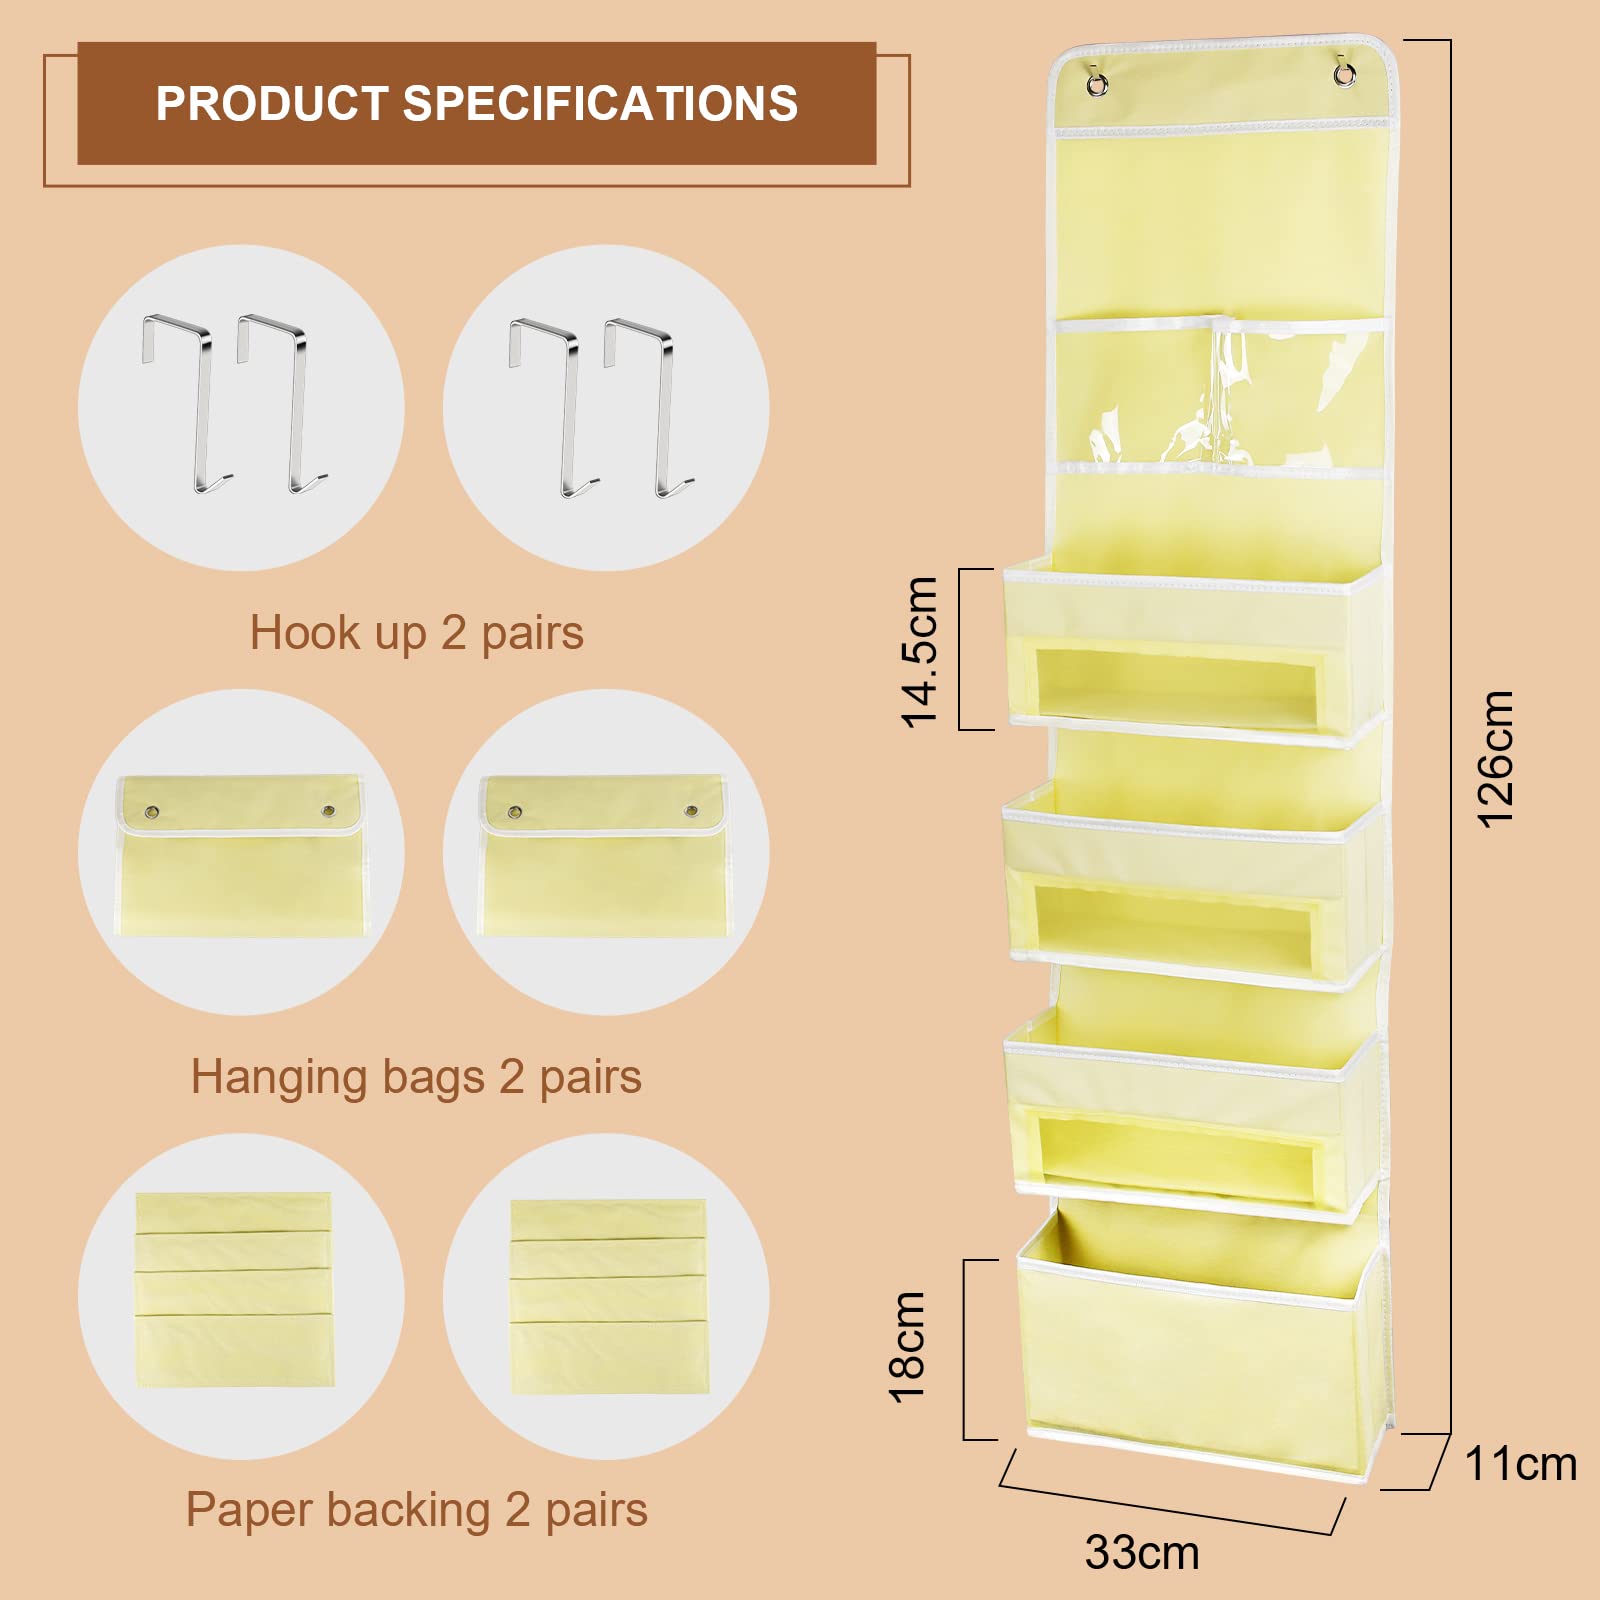 FGSAEOR 5 Layers Over The Door Organizer - 2 Pack Nursery Closet Organizers Baby Storage with 4 Foldable Big Pocket Storage,Clear Window PVC Pocket for Pantry,Toys and Sundries - Beige